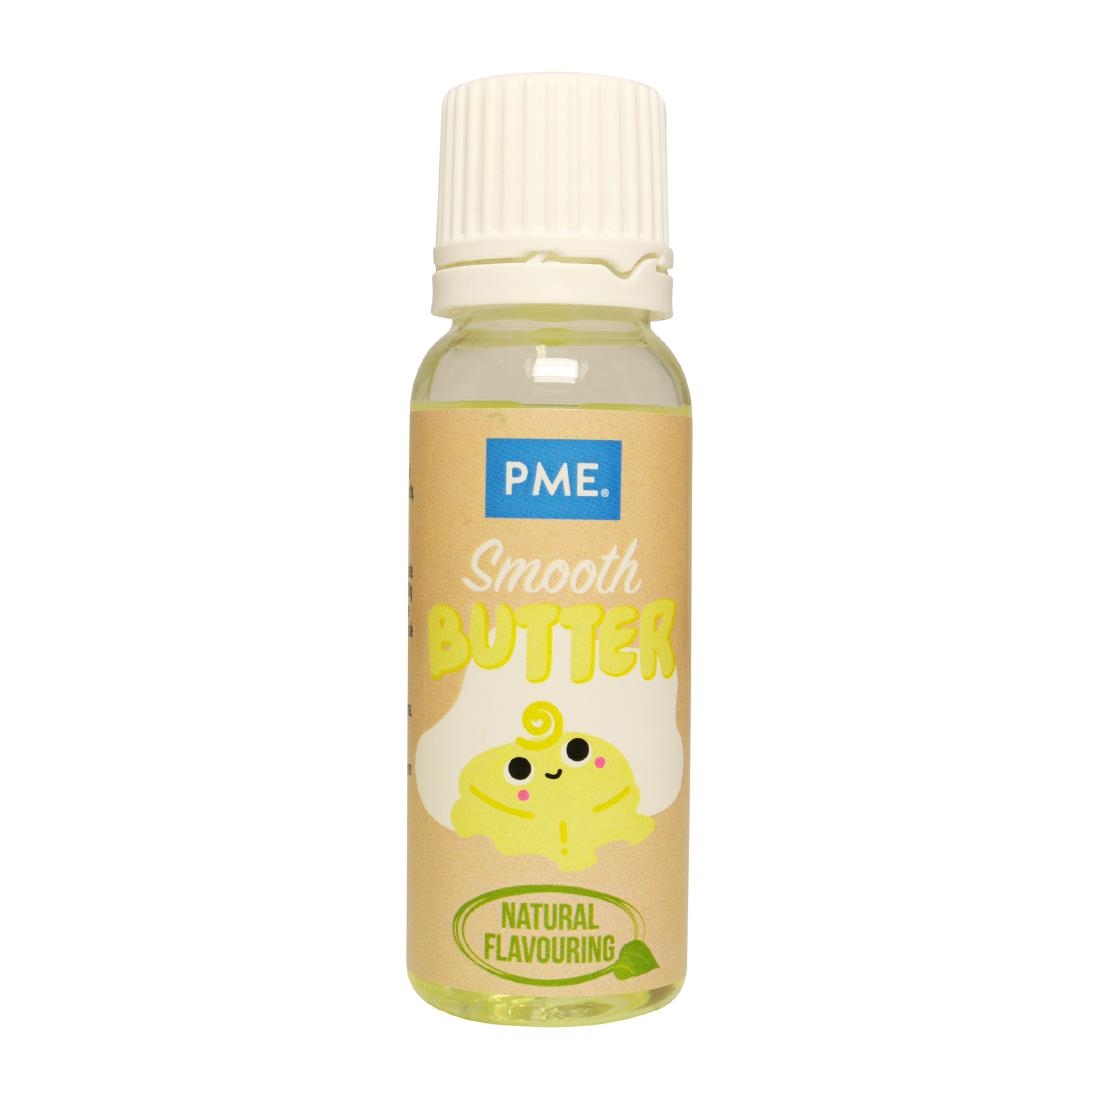 PME 100 Natural Flavour Butter 25g (HU247)